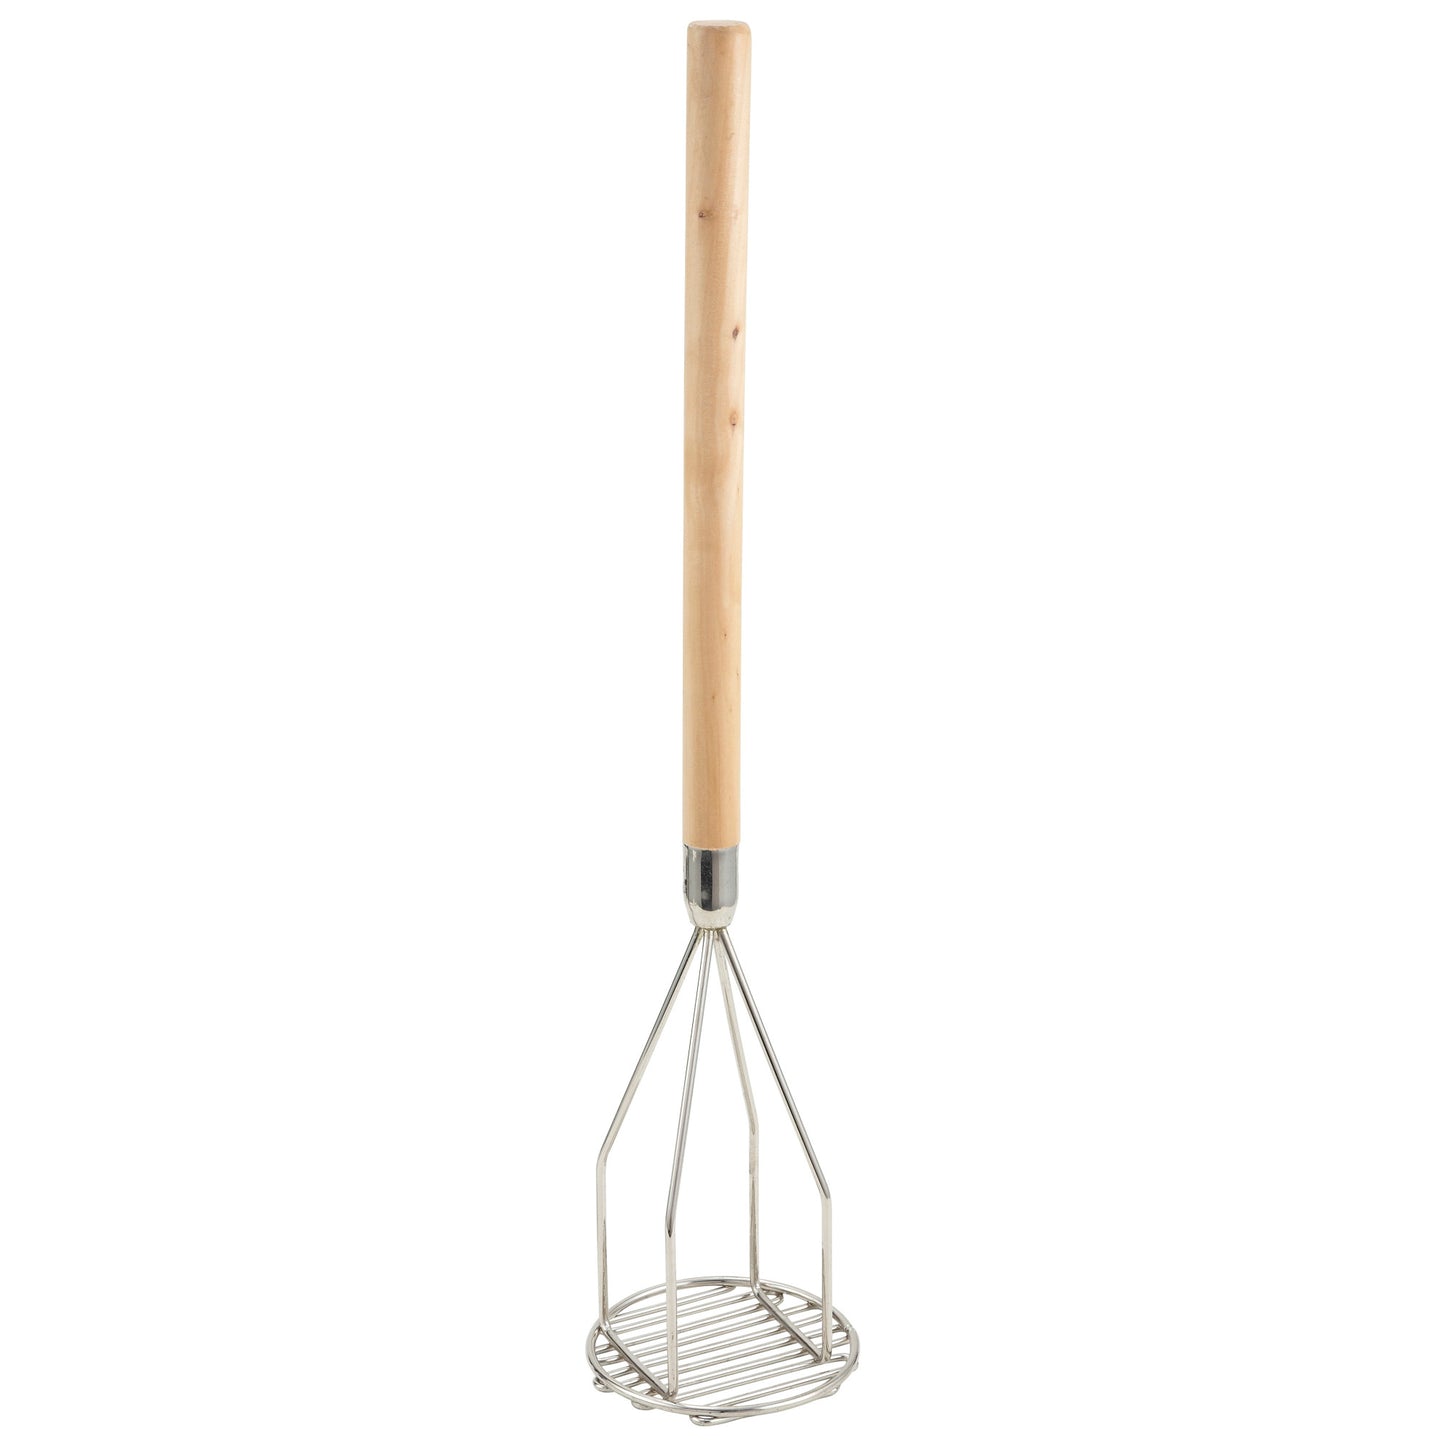 Potato Masher with Wooden Handle - 5" Round